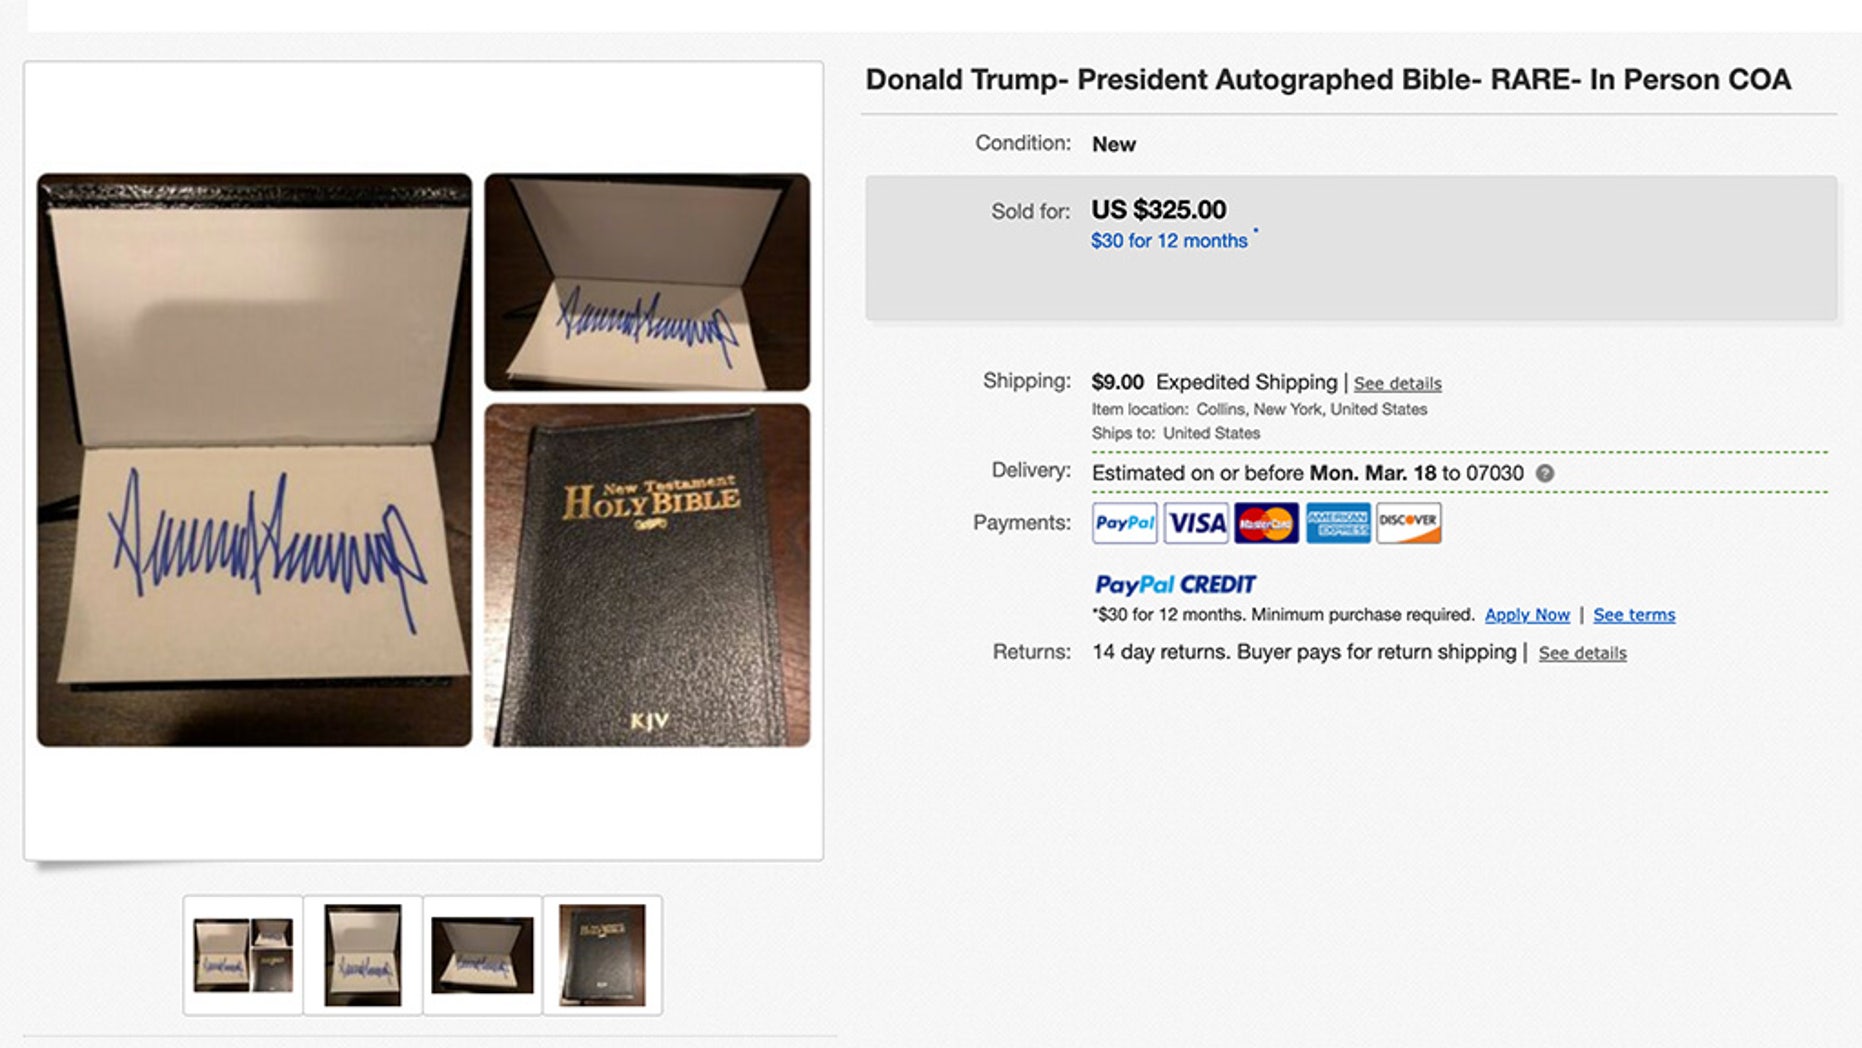 Bible signed by Trump fetches $325 on eBay | Fox News